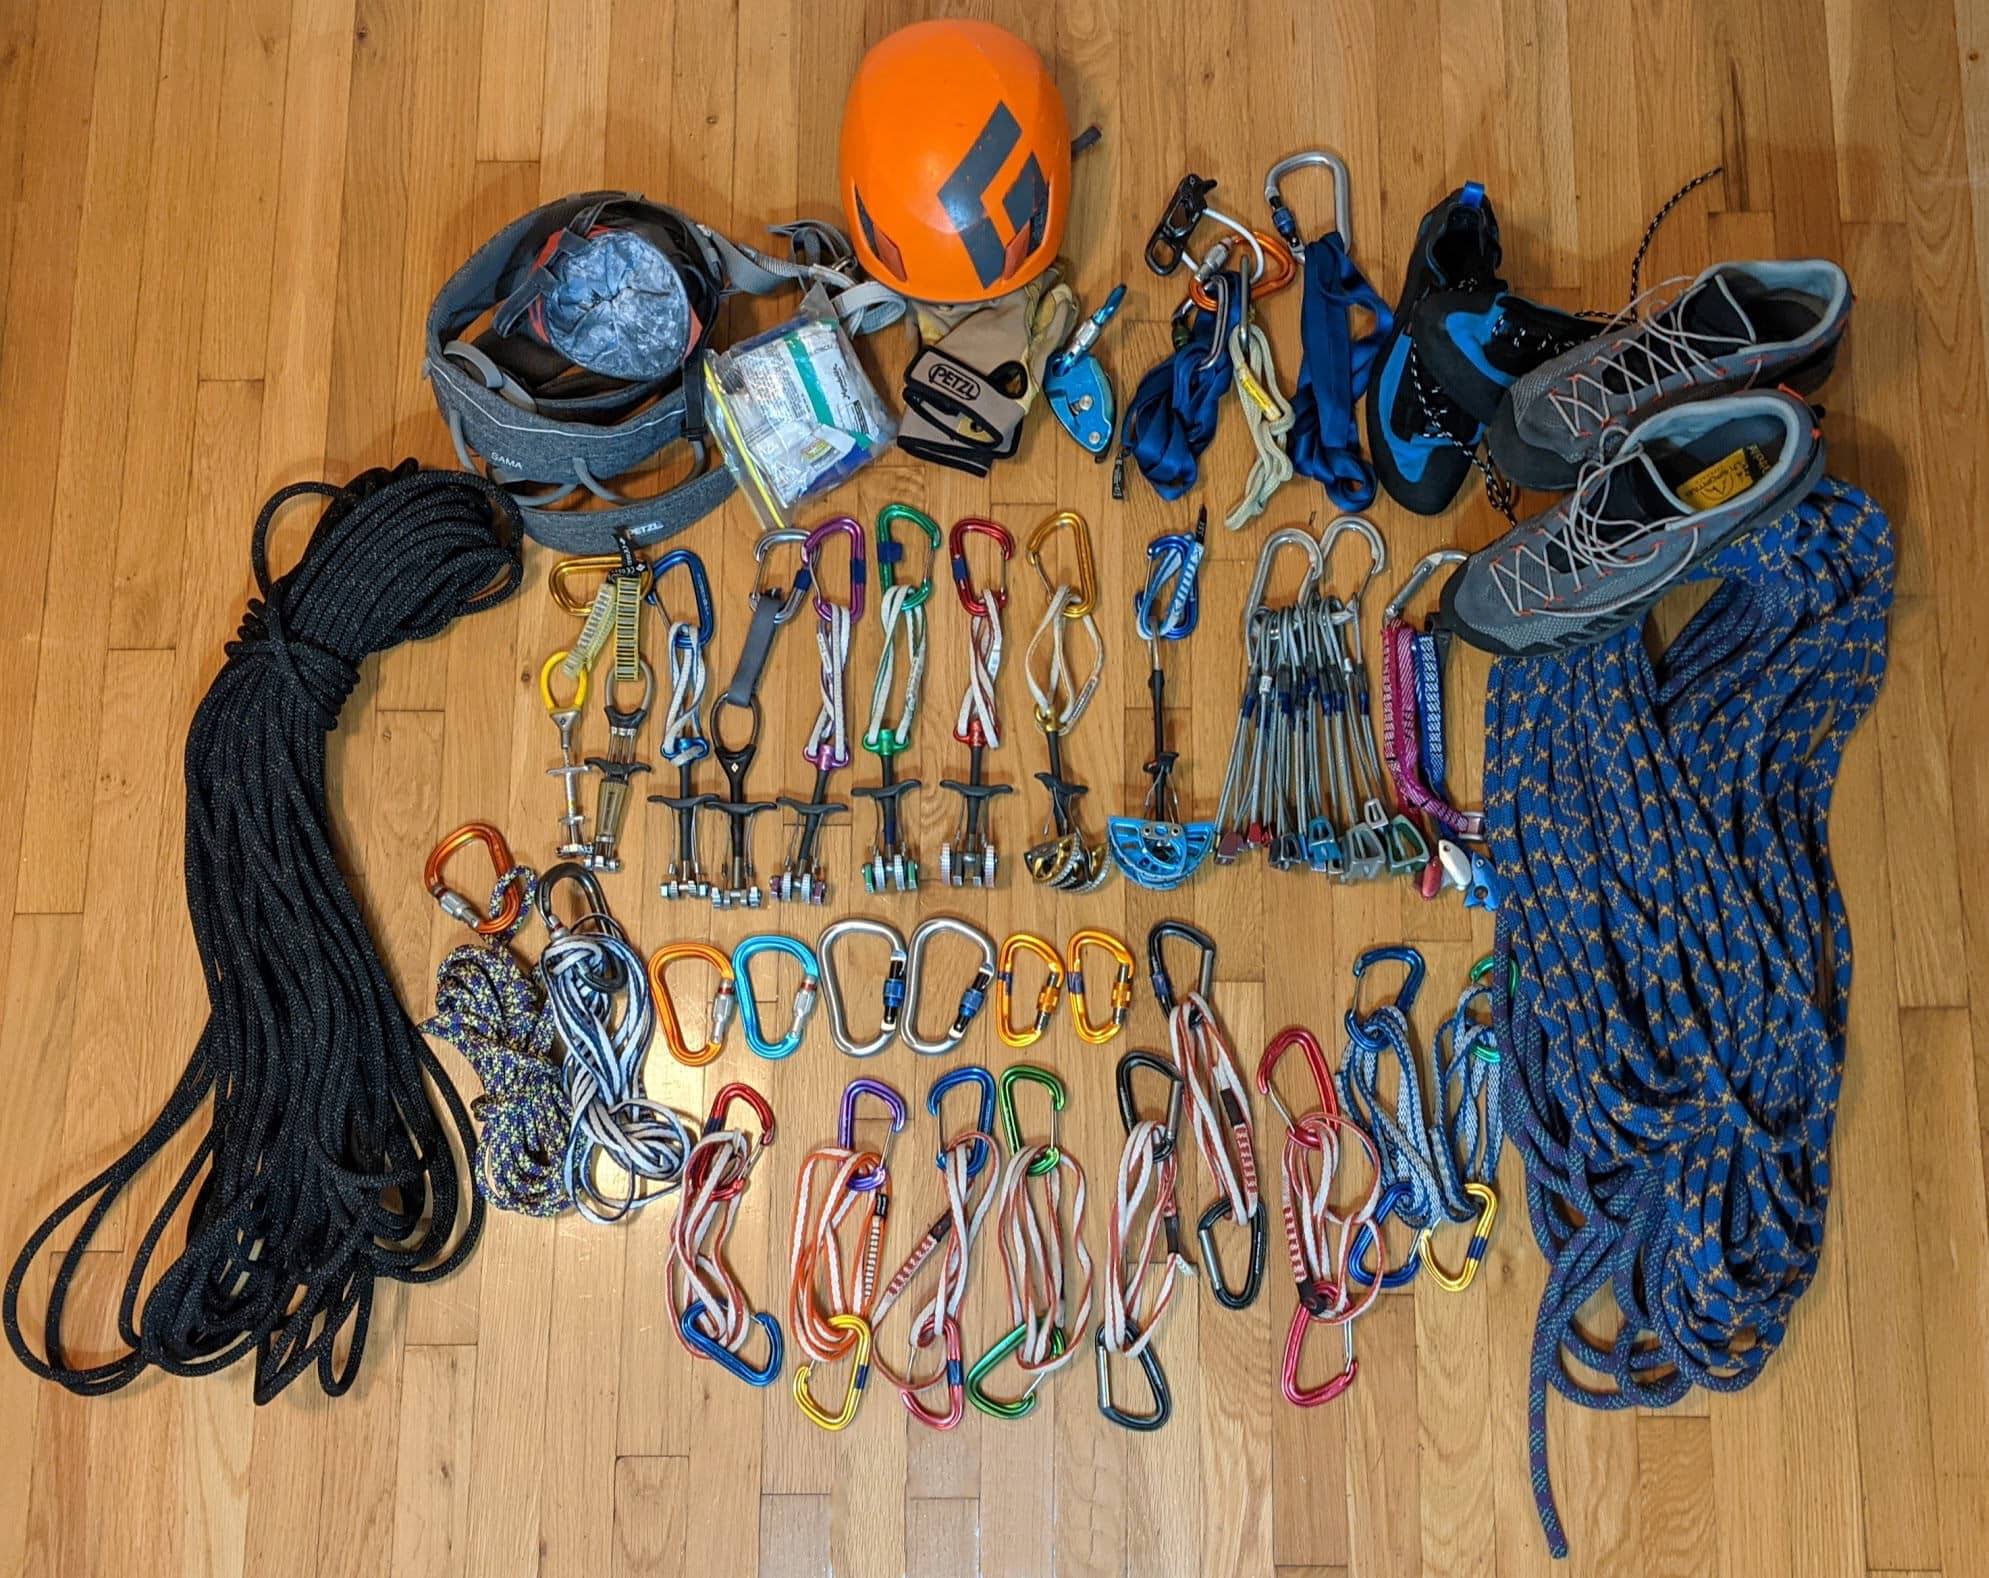 A typical trad climbing rack. Showing the variety of gear needed.